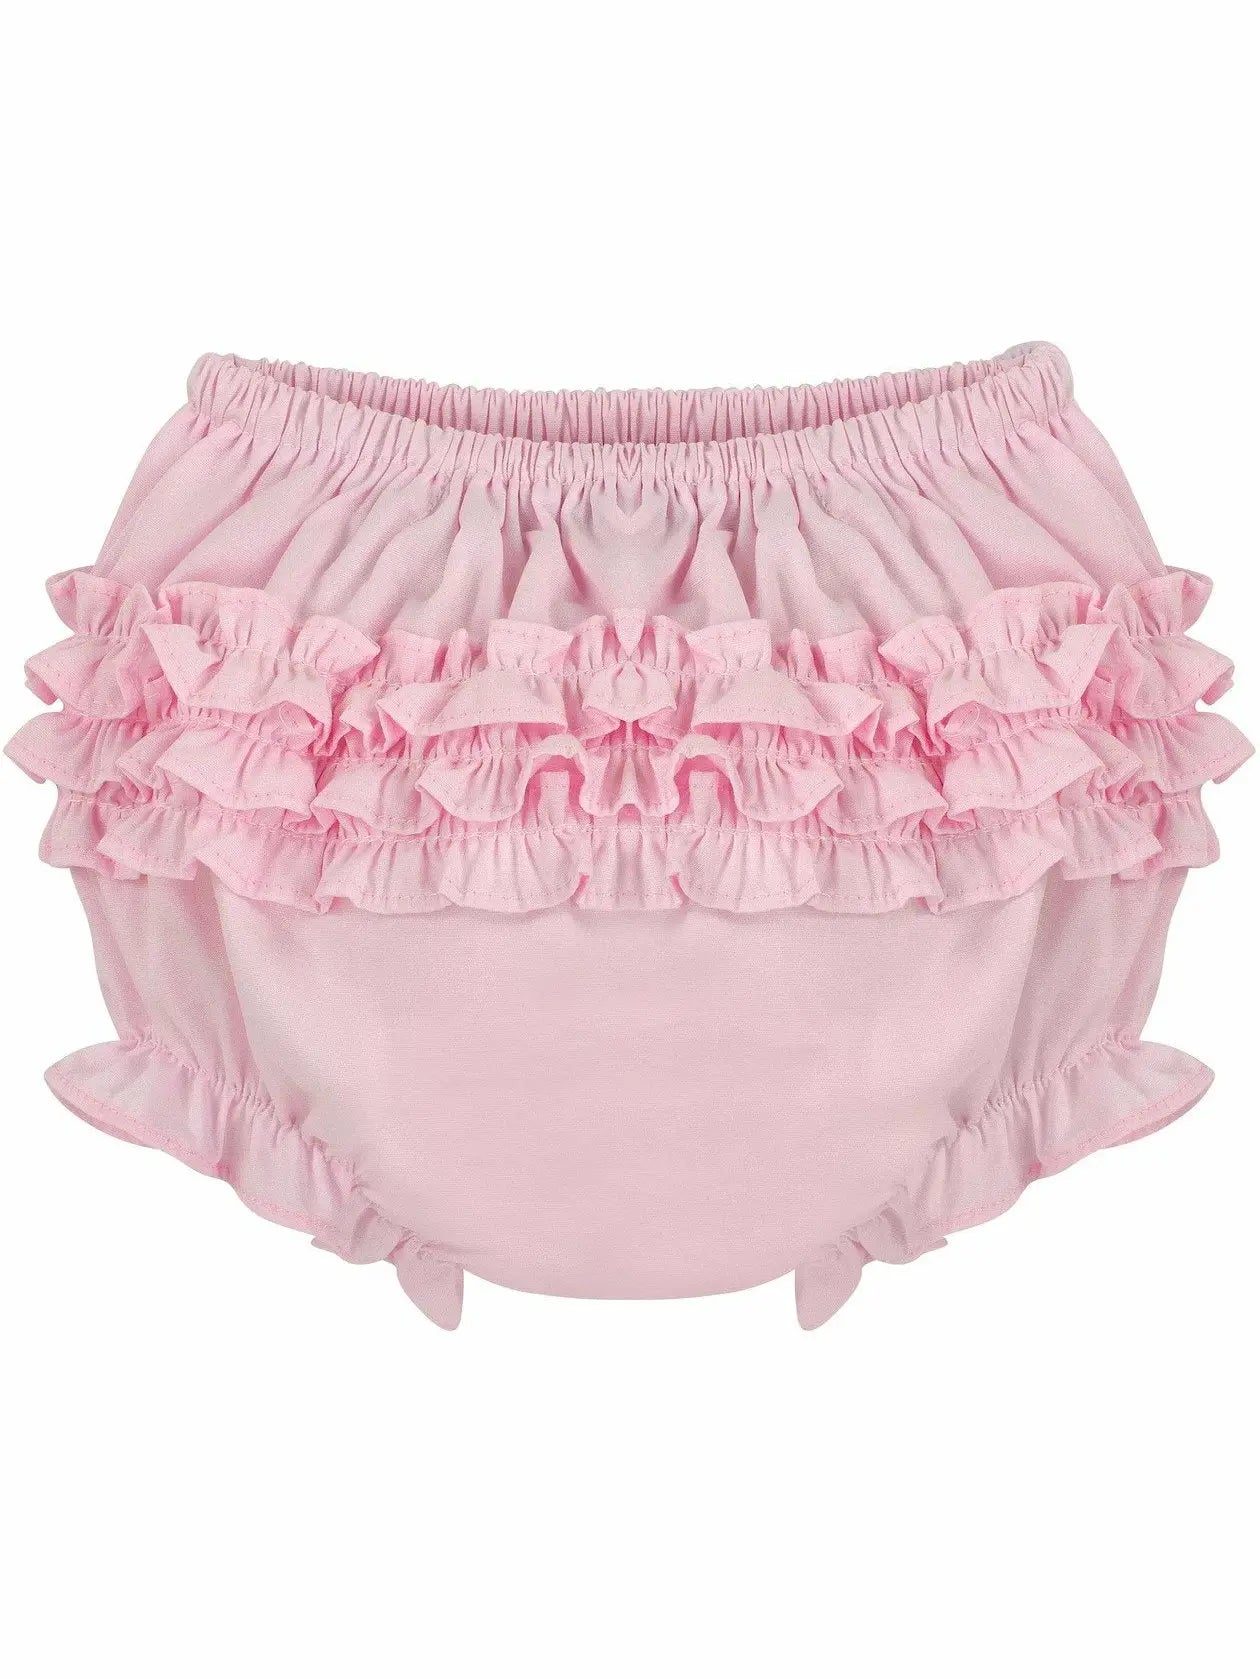 Julius Berger & Carriage Boutique - Baby Girl Bloomers - Ruffled Pink